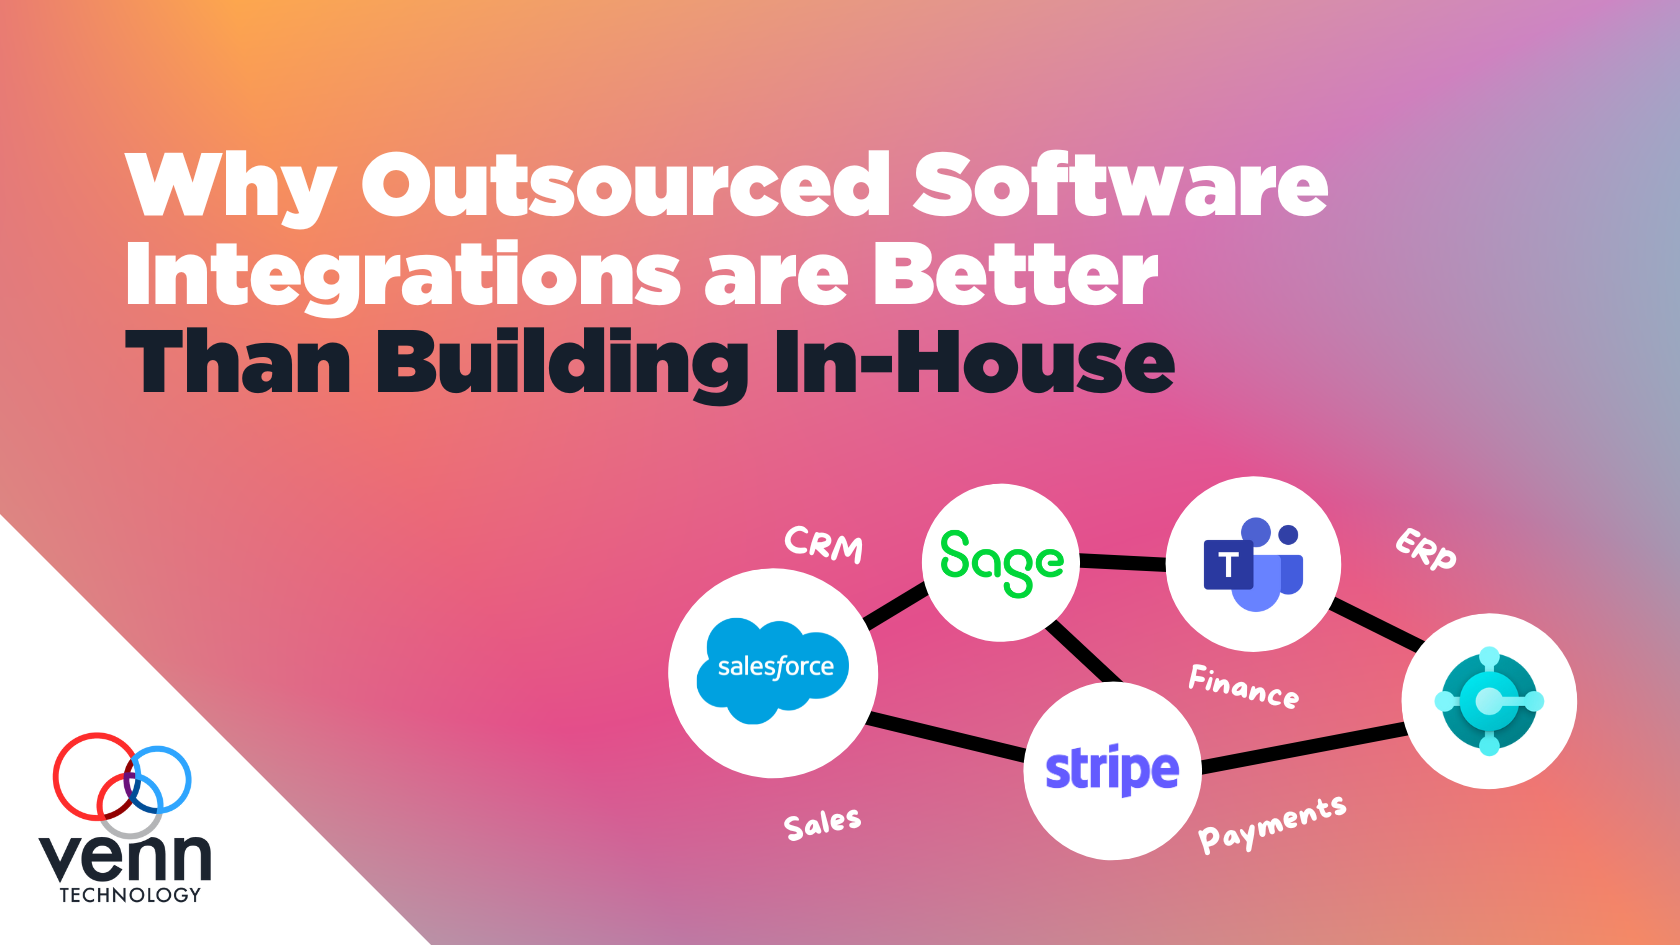 Why Outsourced Software Integrations are Better Than Building In-House